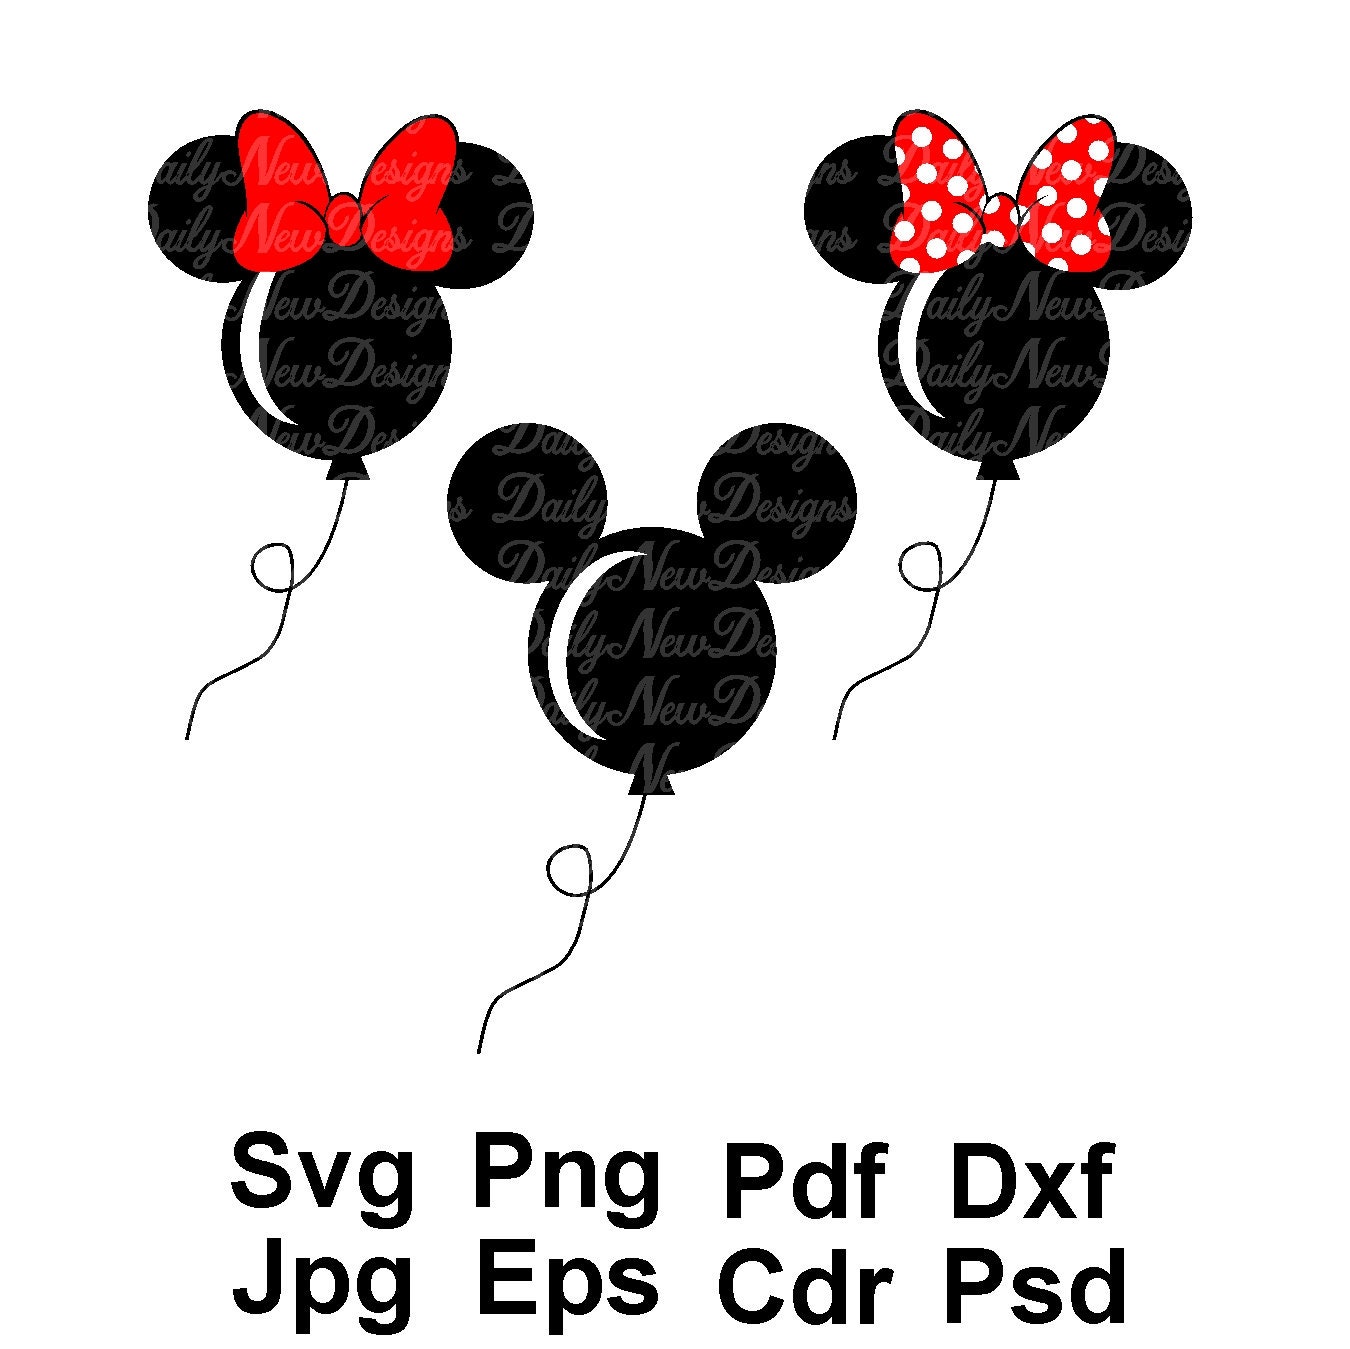 Download Mickey Mouse Minnie Balloons 3-for-1 SVG Disney Balloons